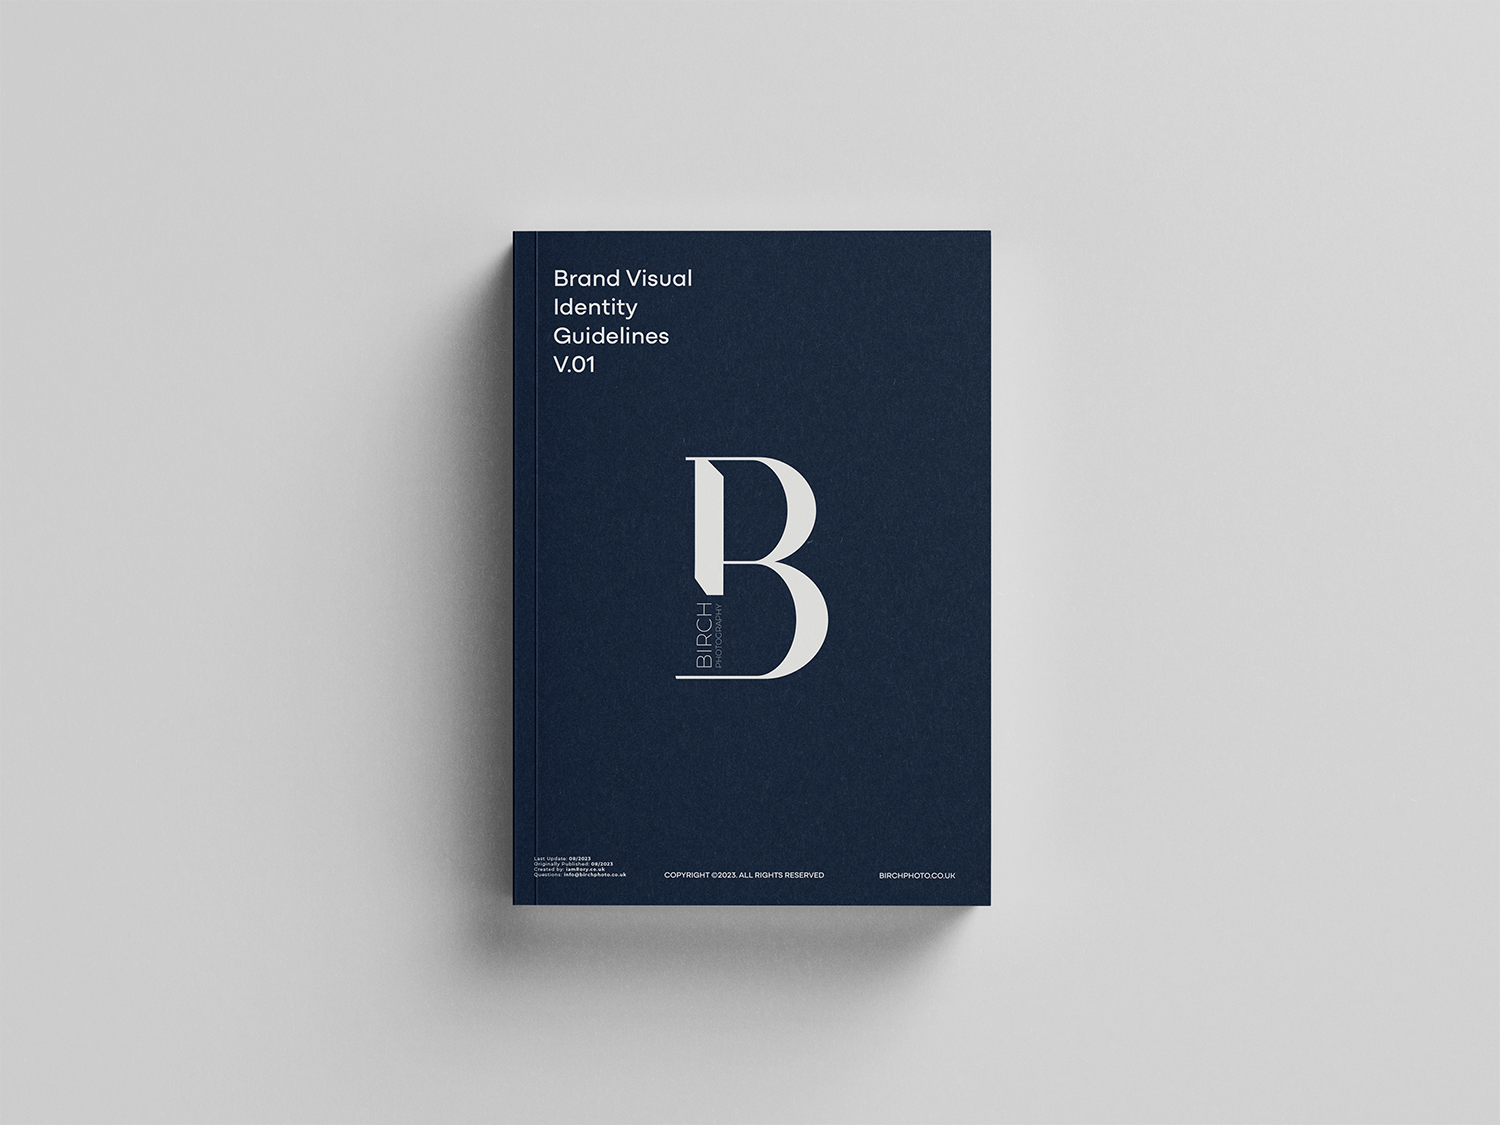 The cover of the 'brand guidelines'.